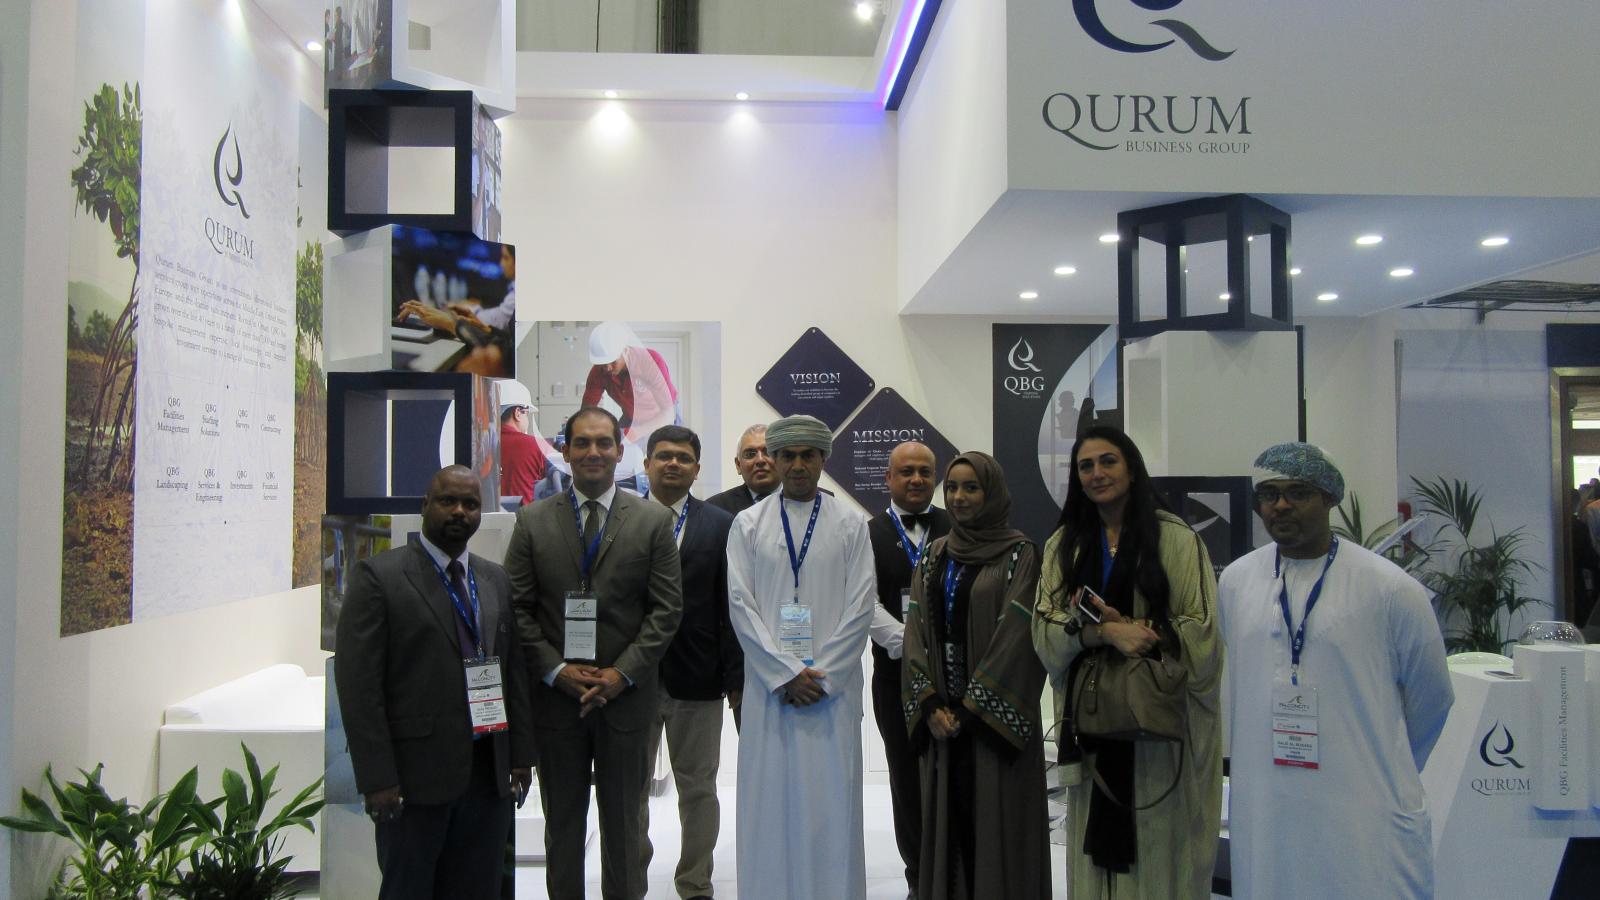 QBG Highlight Growing Role of Business Management Solution At Cityscape Global